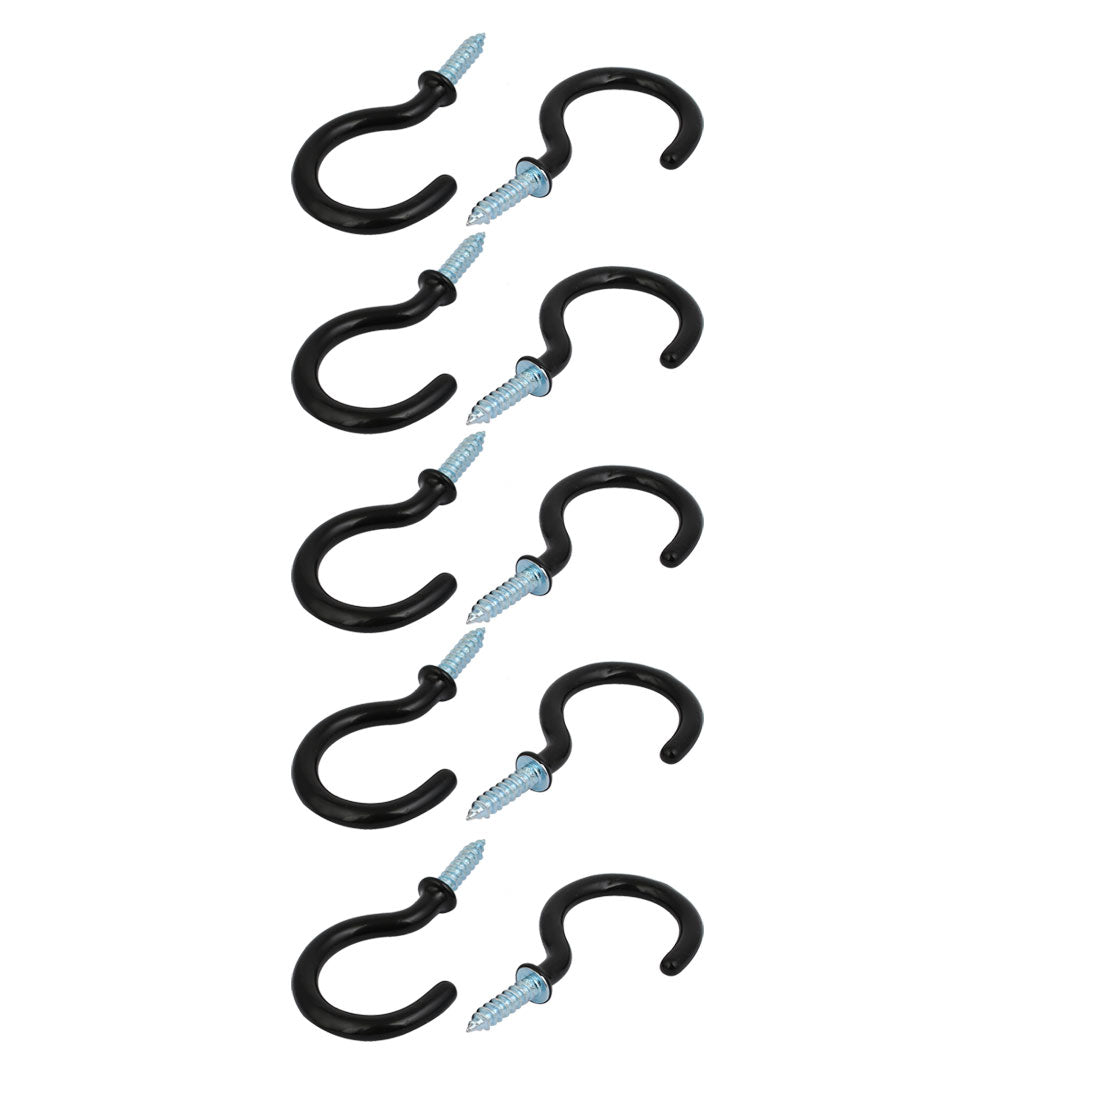 Uxcell 0.67 Small Screw Eye Hooks Self Tapping Screws Carbon